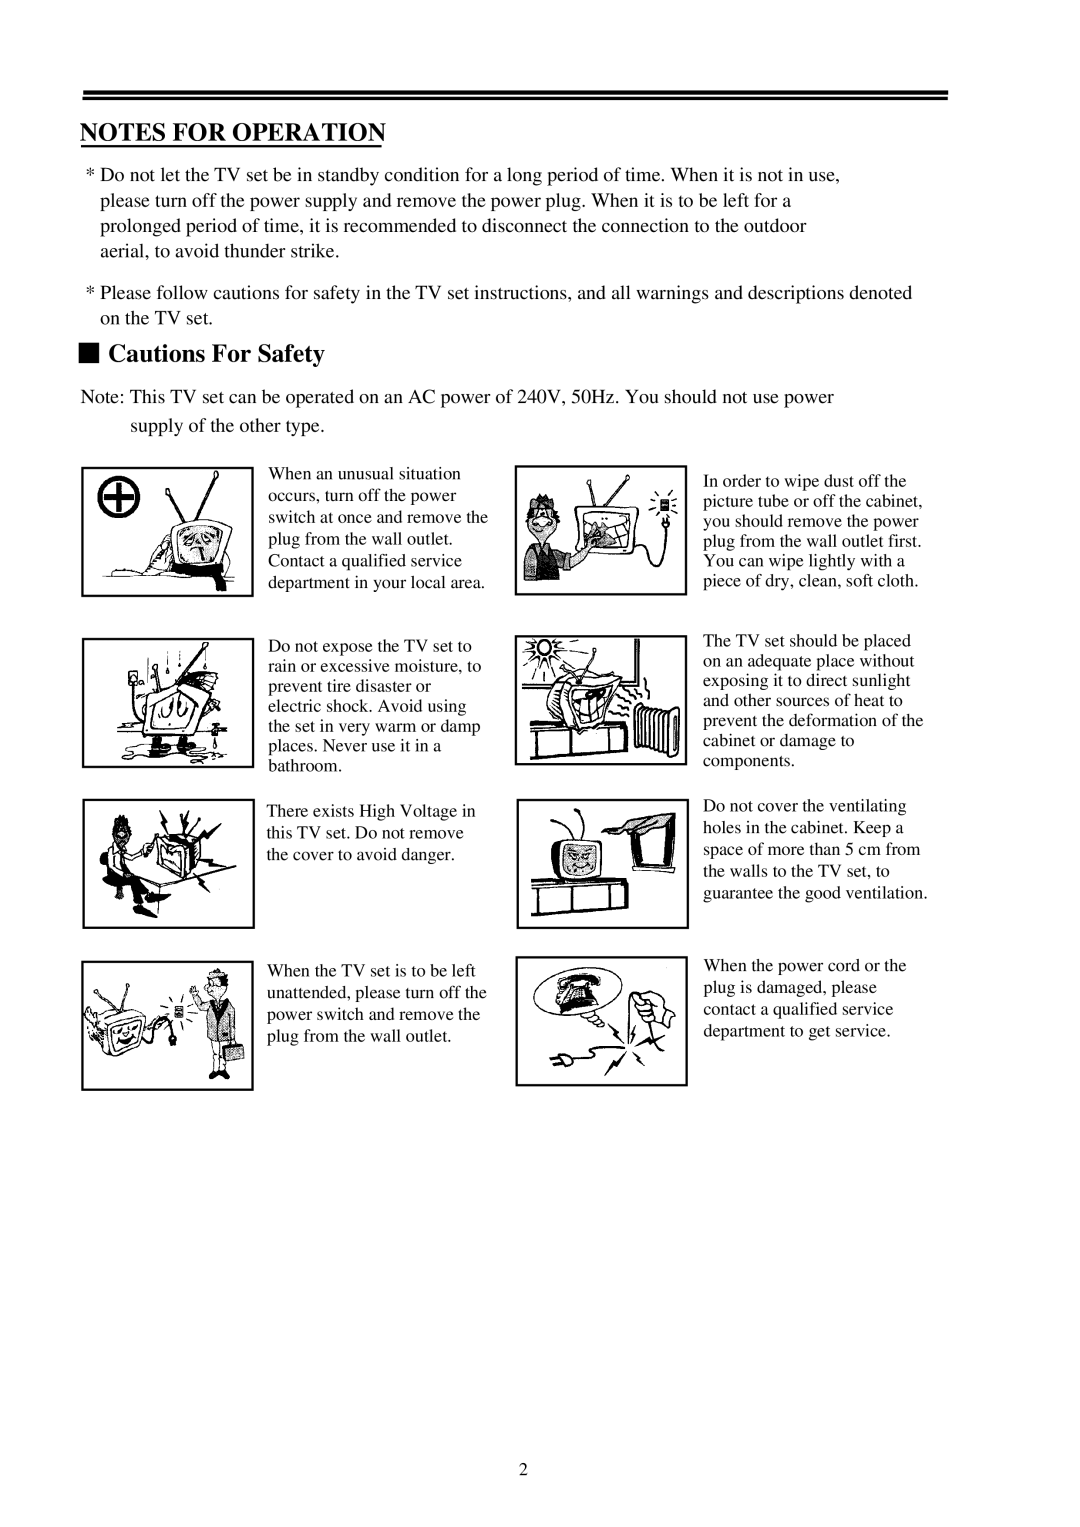 Palsonic 7118 owner manual Notes For Operation, Cautions For Safety 